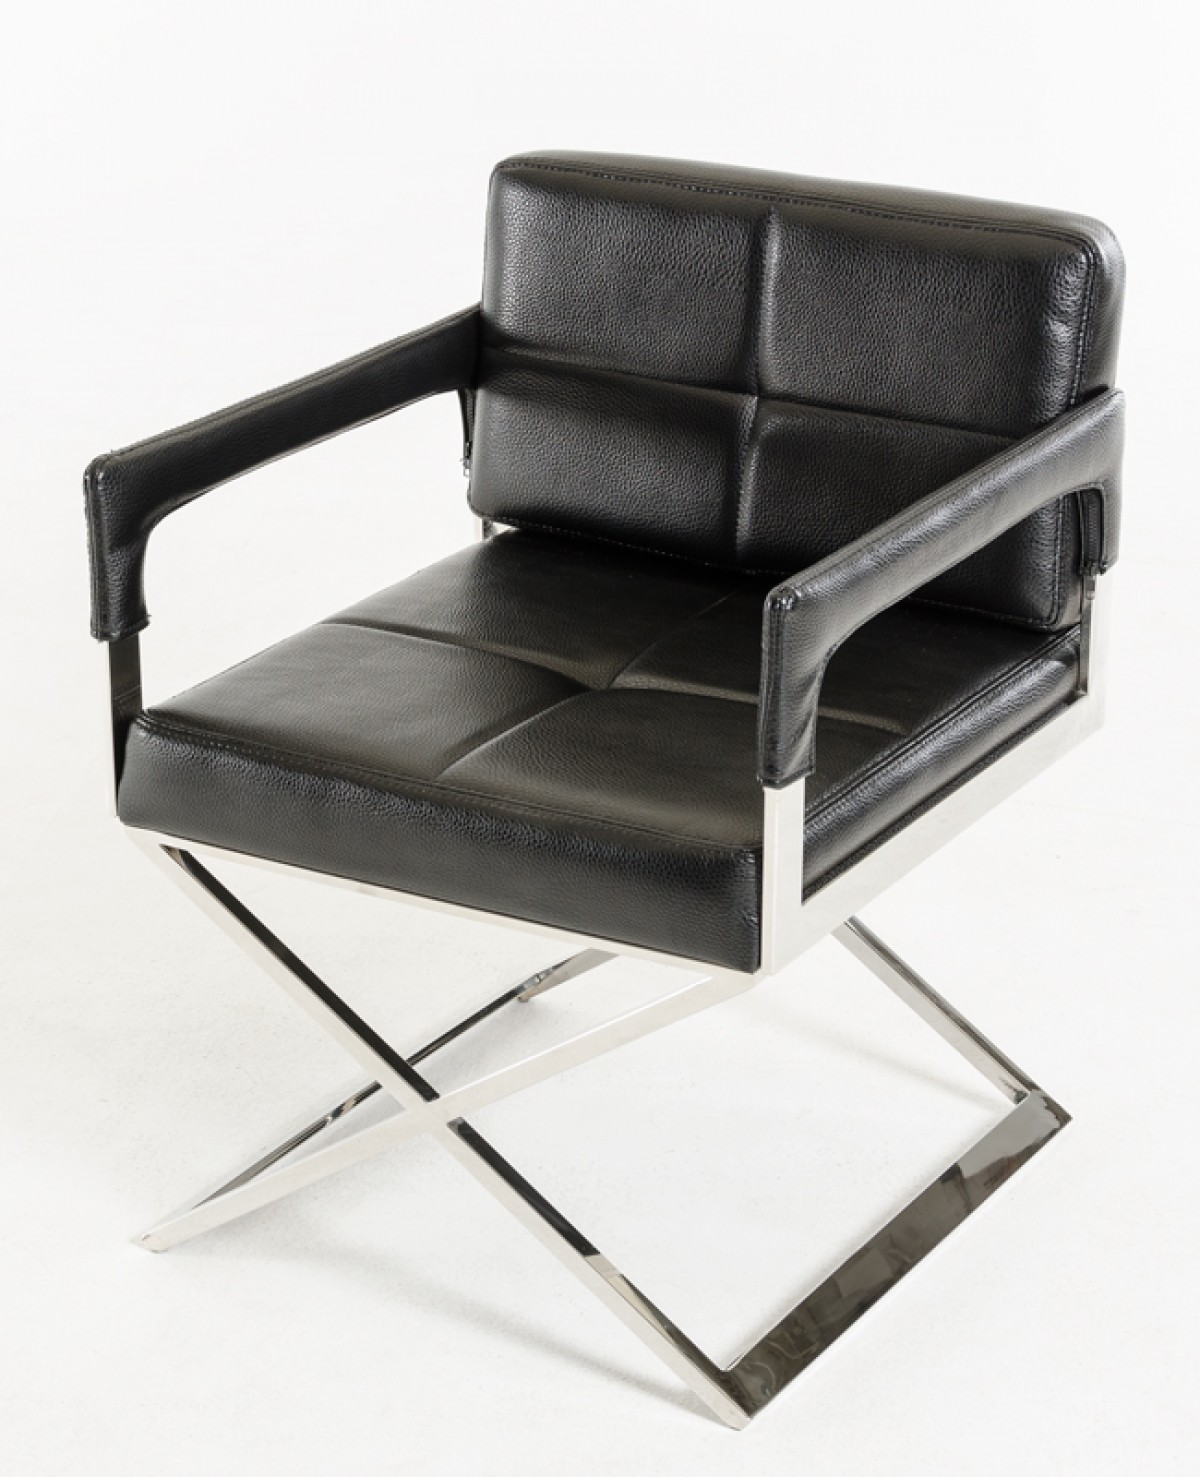 Stainless Steel Frame Black Bonded Leather Chair Los Angeles California